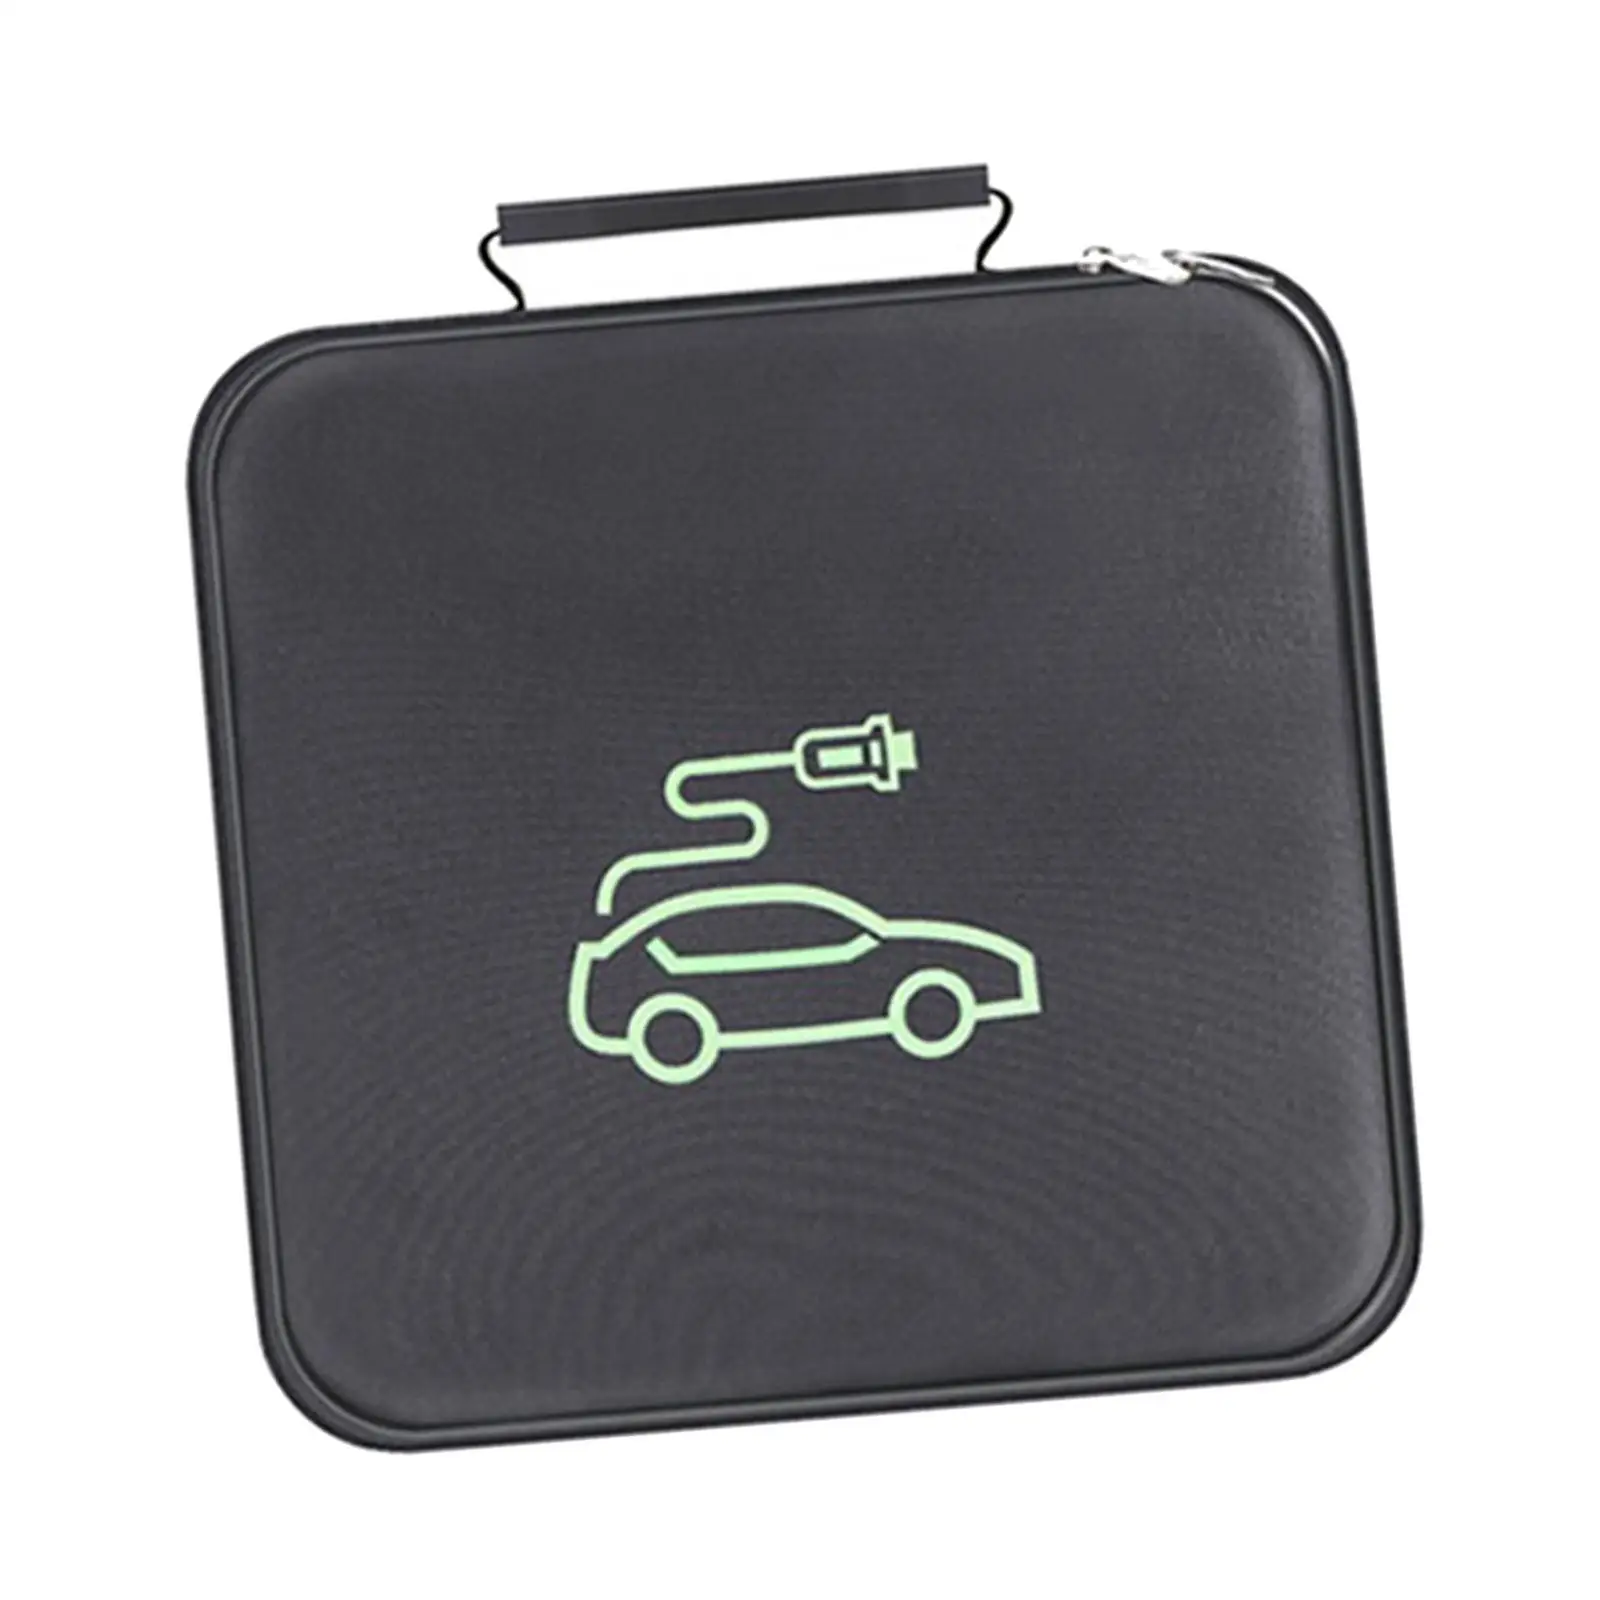 Waterproof EV Cables Bag EV Cable Storage Bag Cable Carry Case Accessories Portable Wear Resistant for Cable Hoses Cords